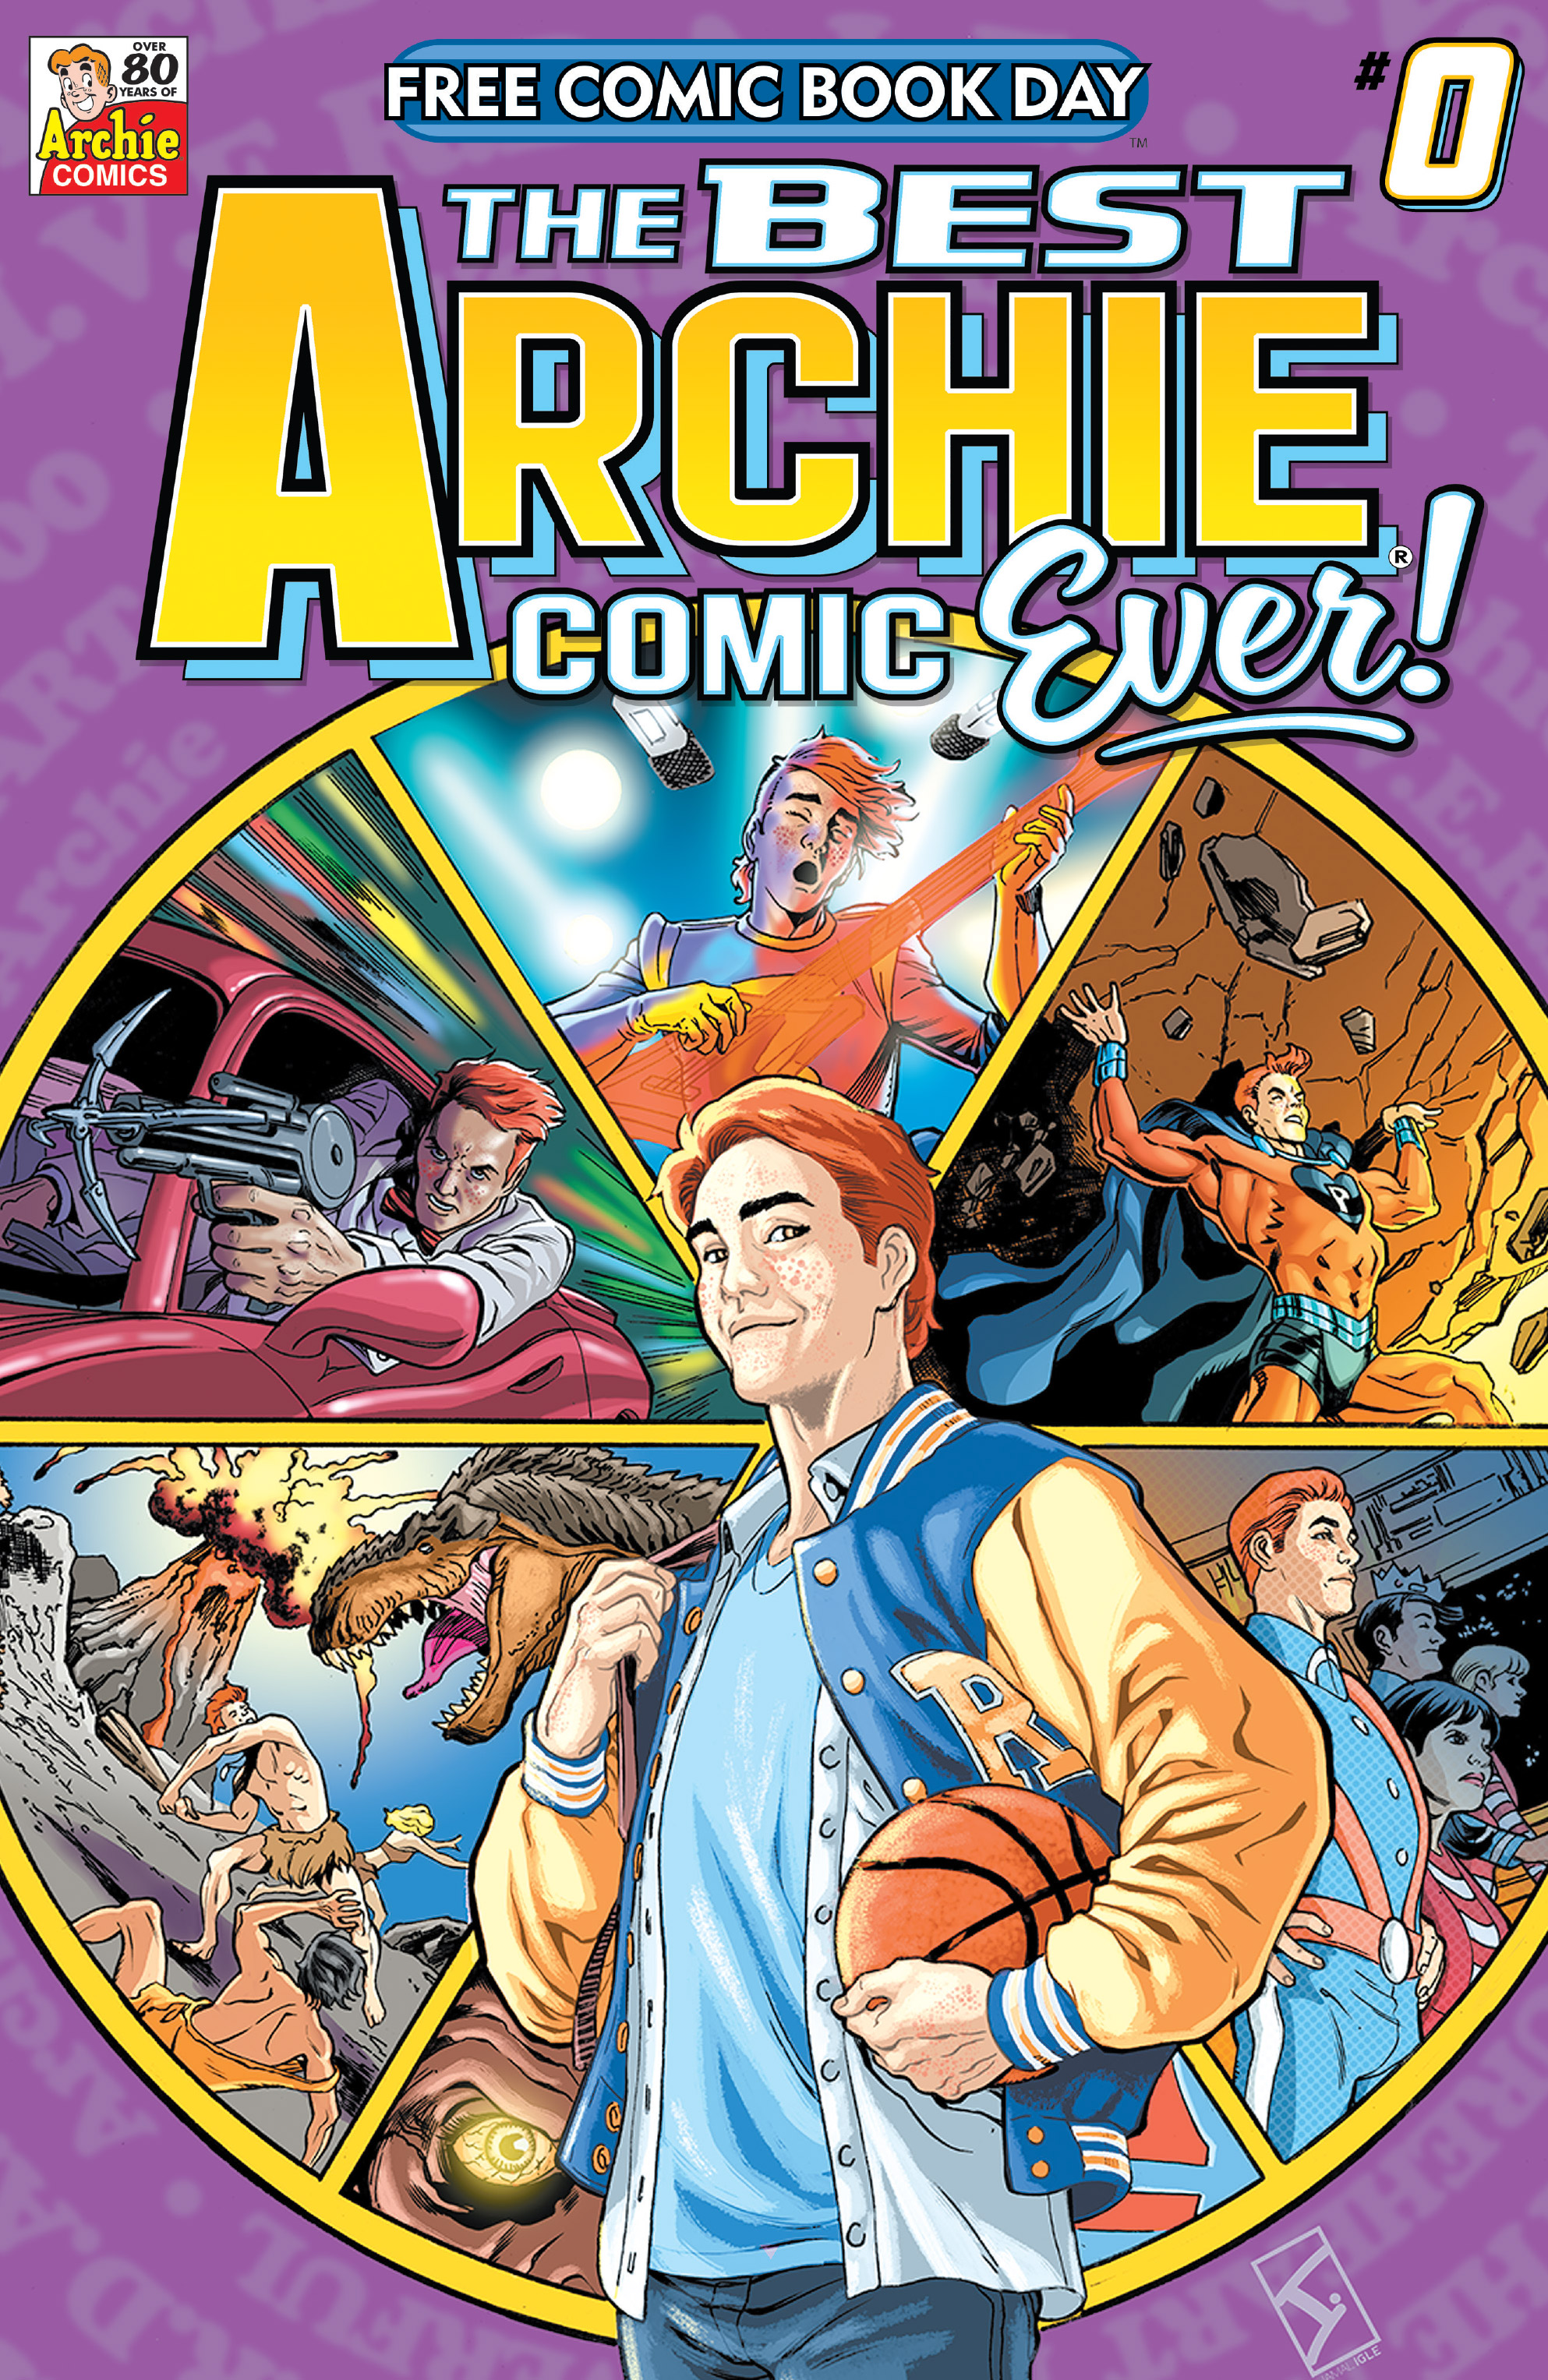 FCBD 2022 Collection: Chapter archie - Page 1